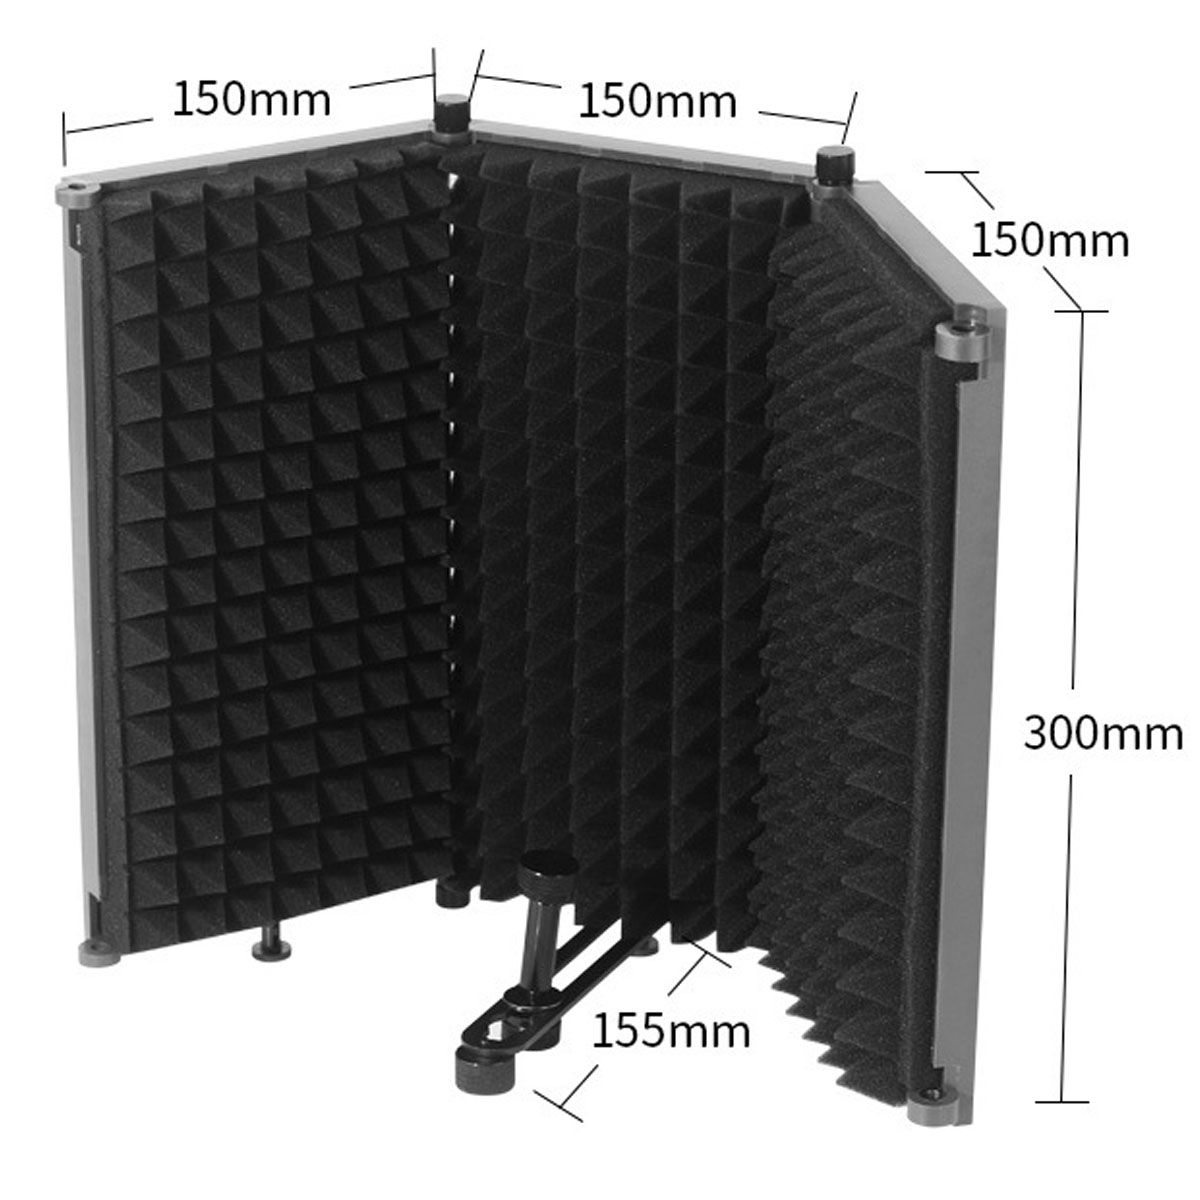 3-Plate-Foldable-Recording-Microphone-Wind-Screen-Board-Microphone-Isolation-Shield-For-Recording-St-1763817